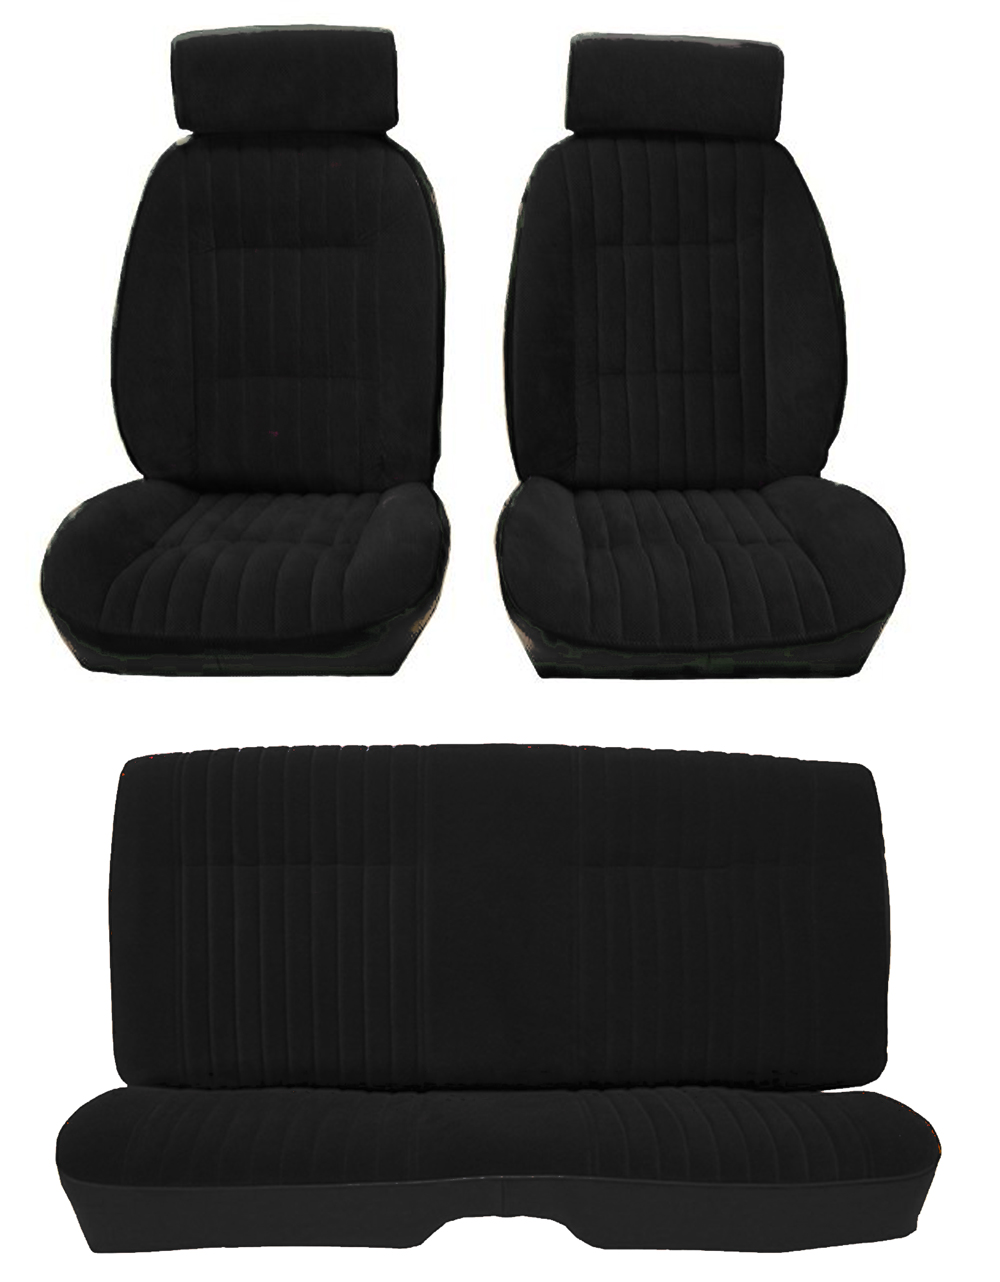 81-88 Monte Carlo SS Front Bucket and Rear Seat Covers Black Vinyl